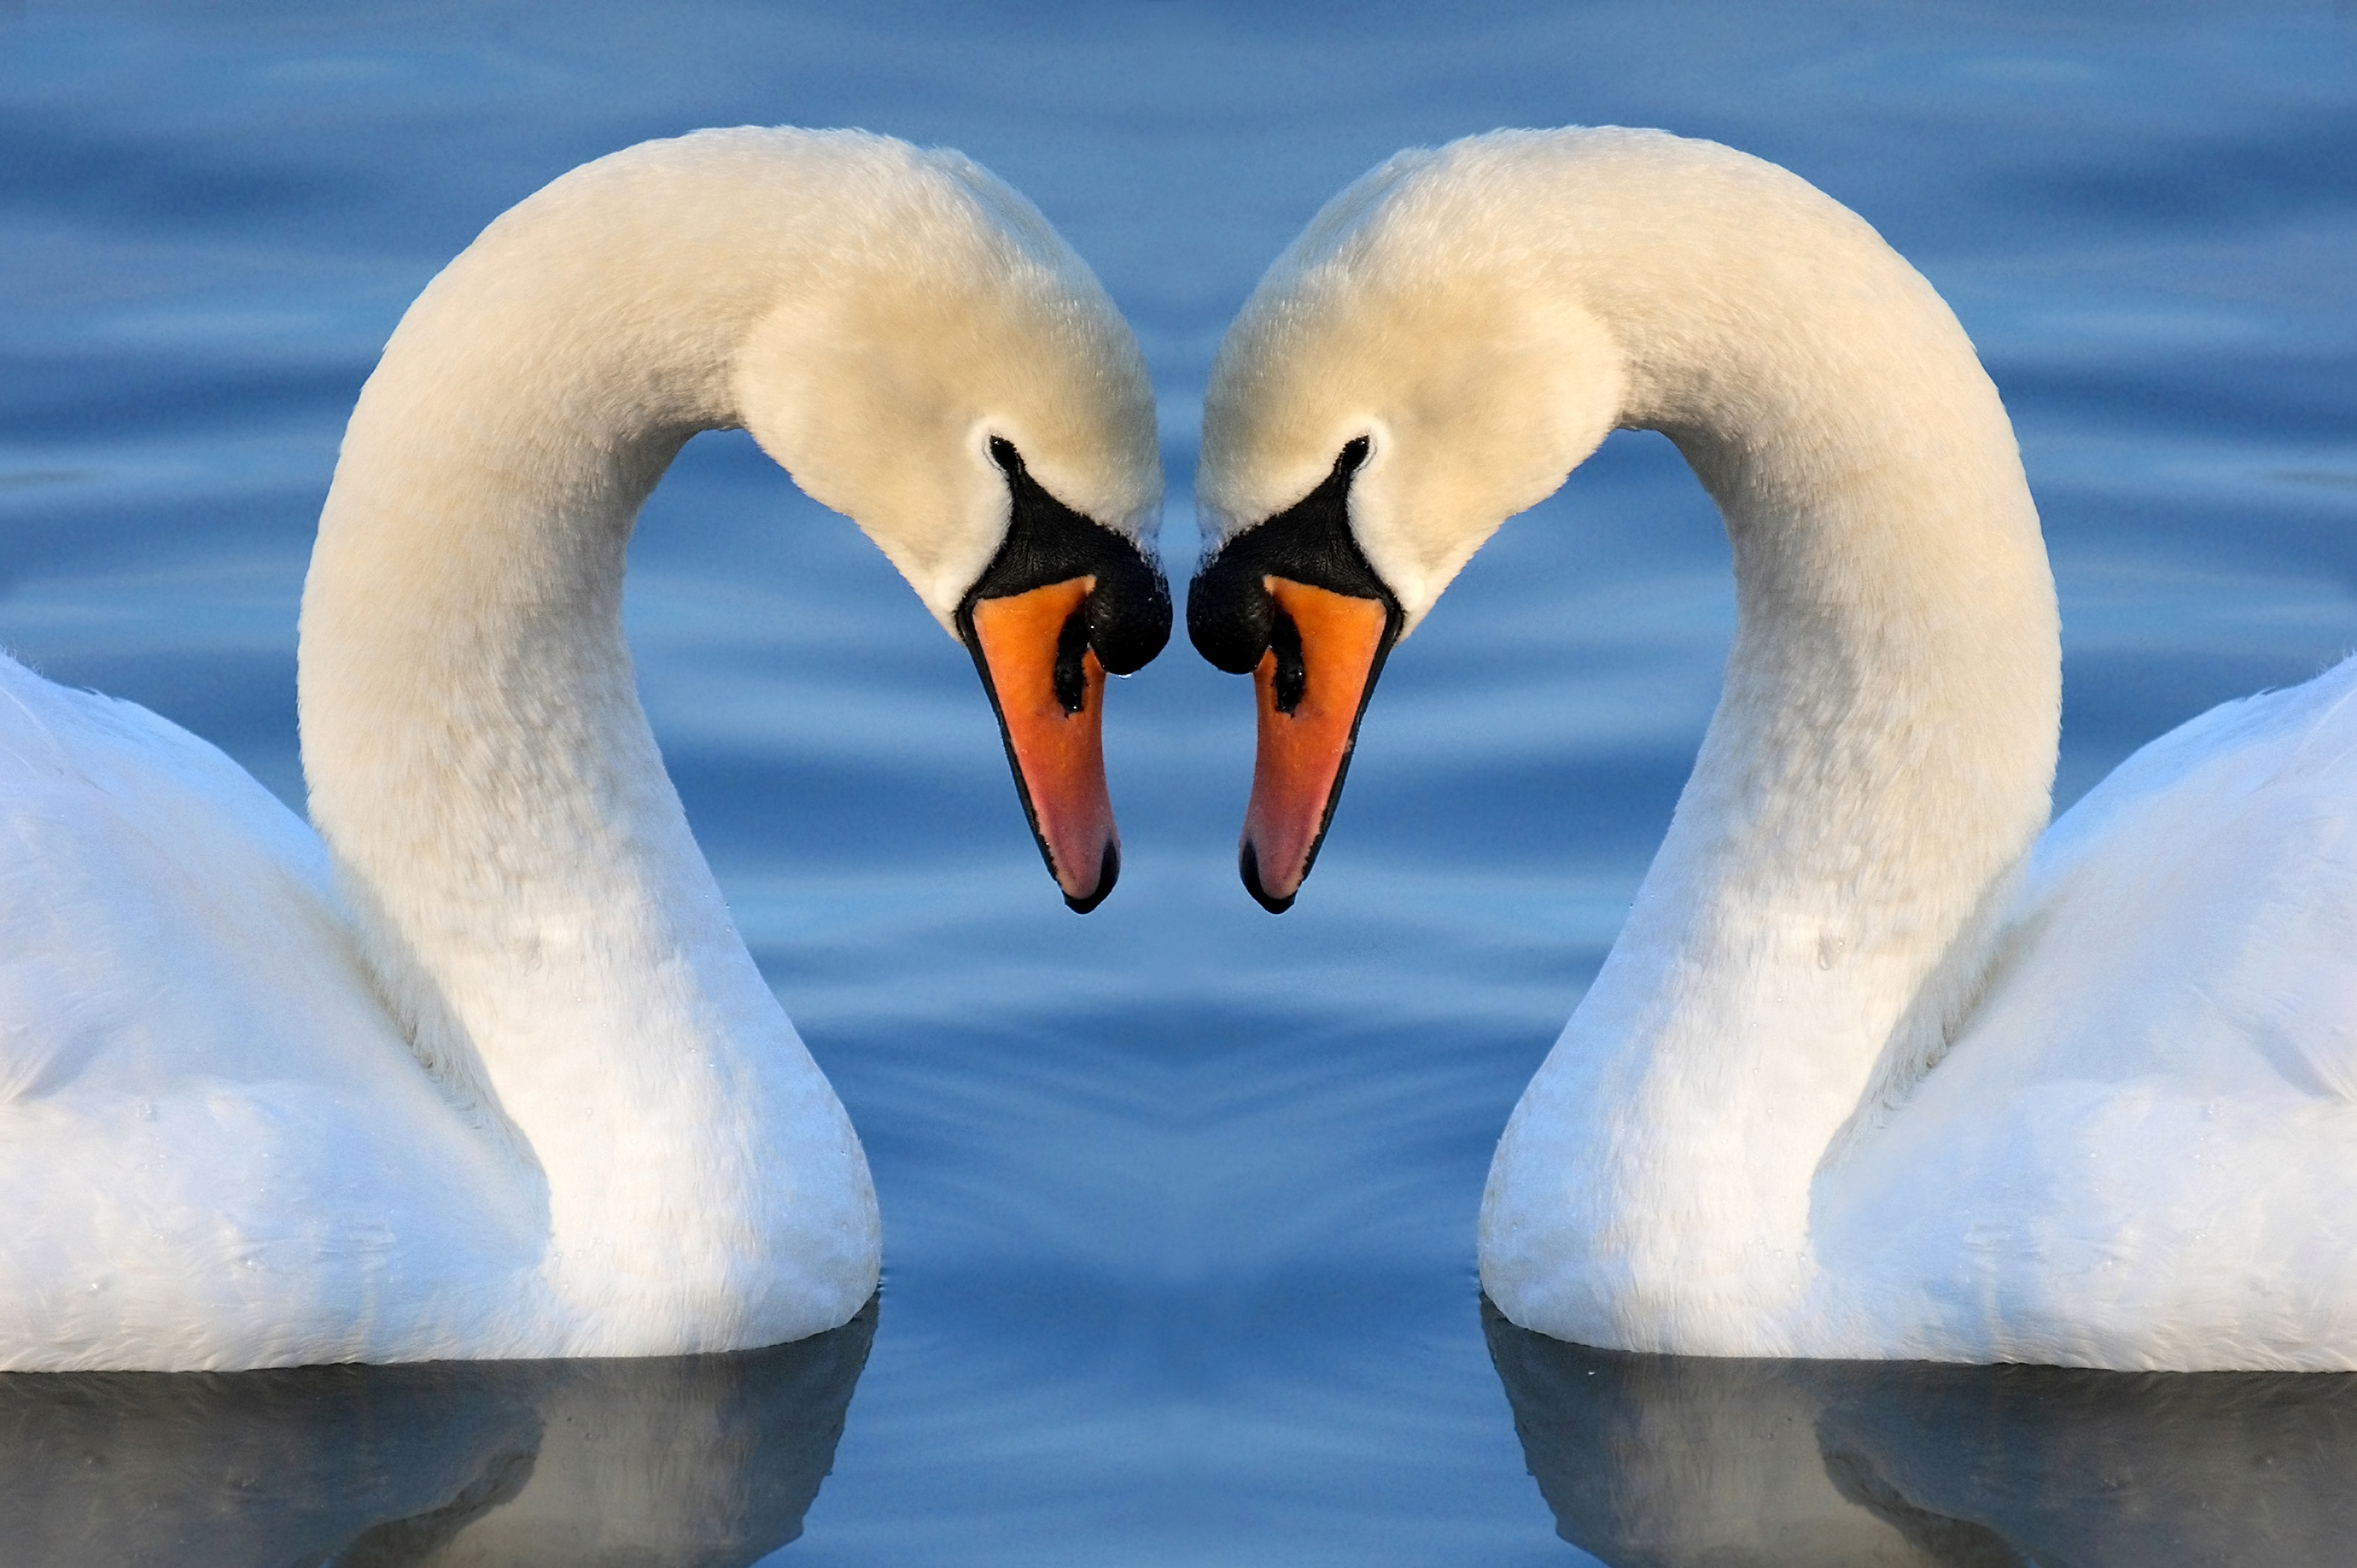 Close-up of two swans with their heads together, making a heart shape.